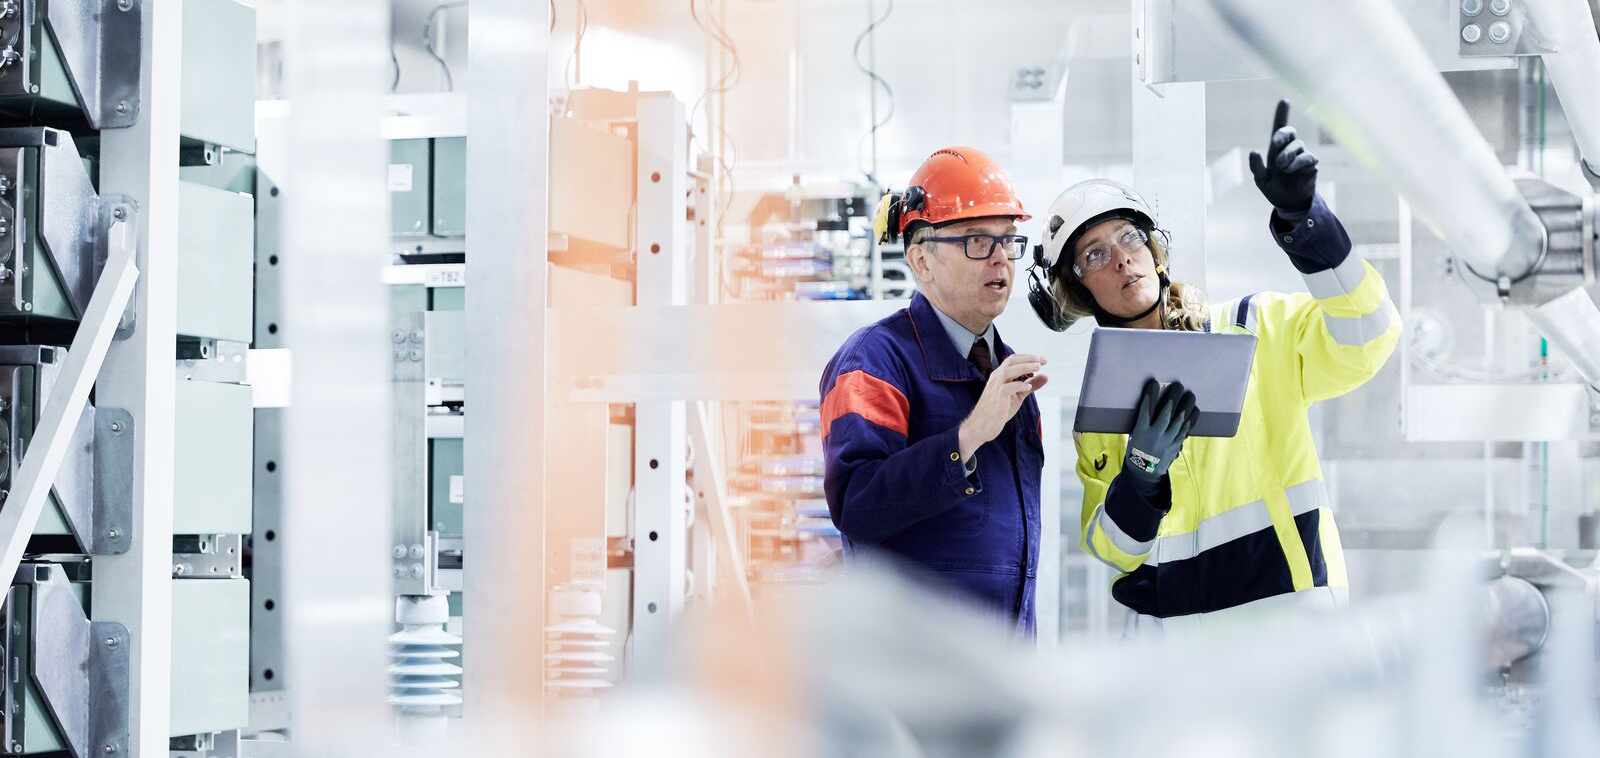 ABB’s new SafetyInsight supports companies operating in high hazard industries across the energy and process sectors.